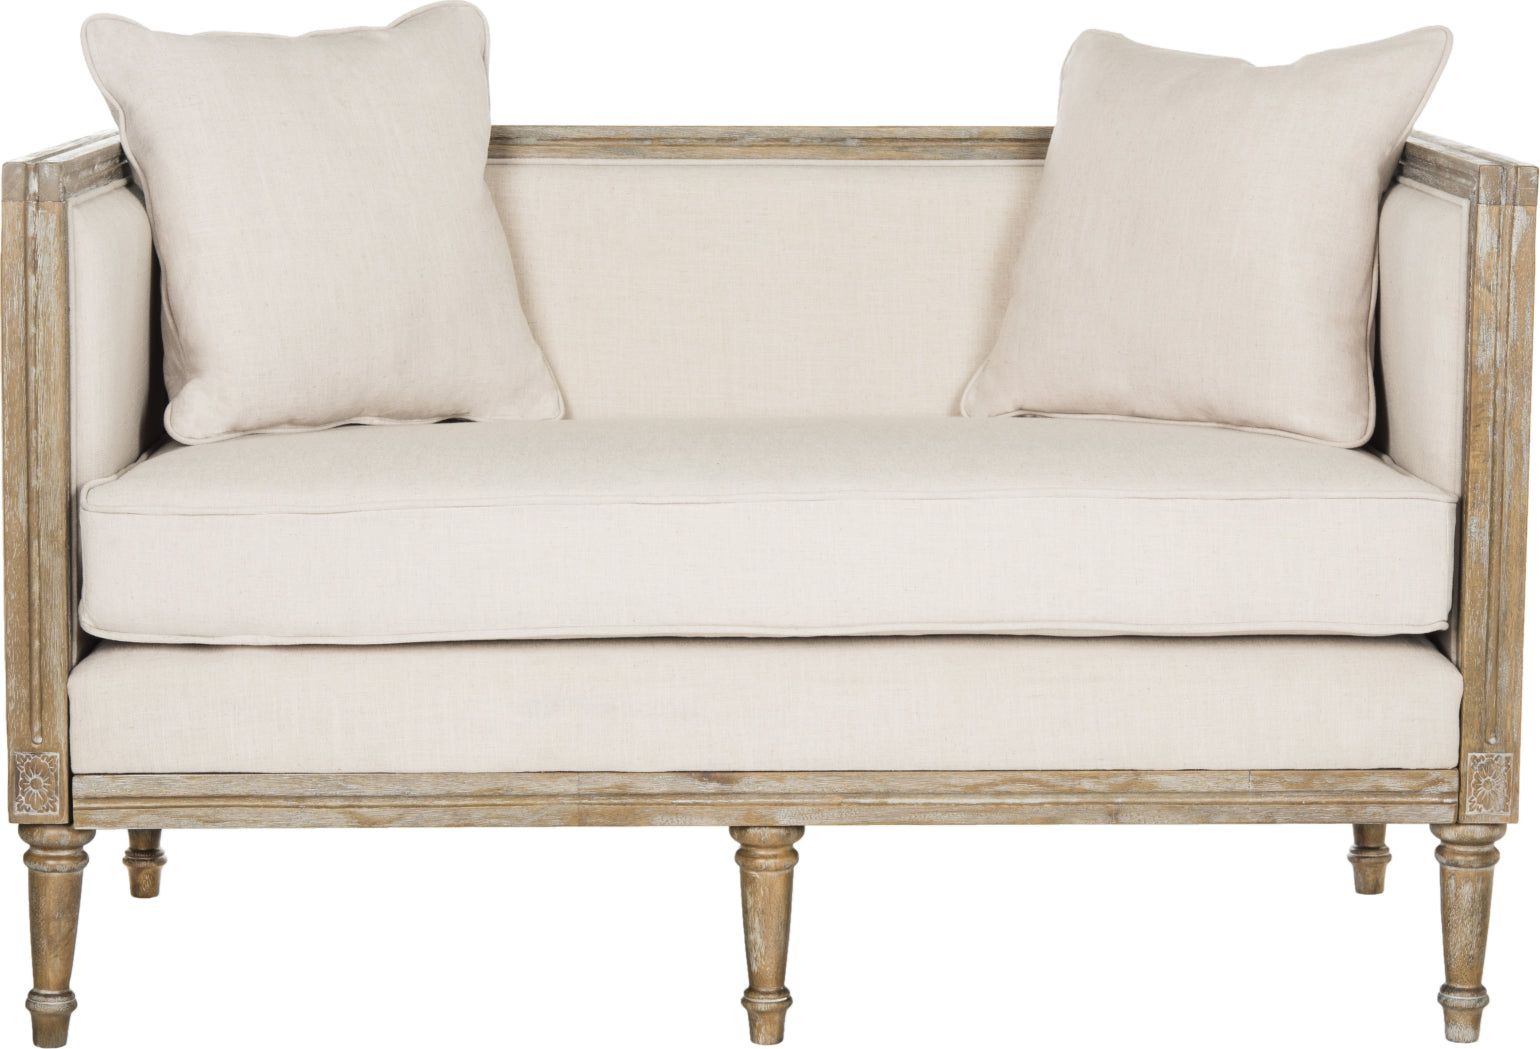 Safavieh Leandra Rustic French Country Settee Beige and Oak Furniture main image